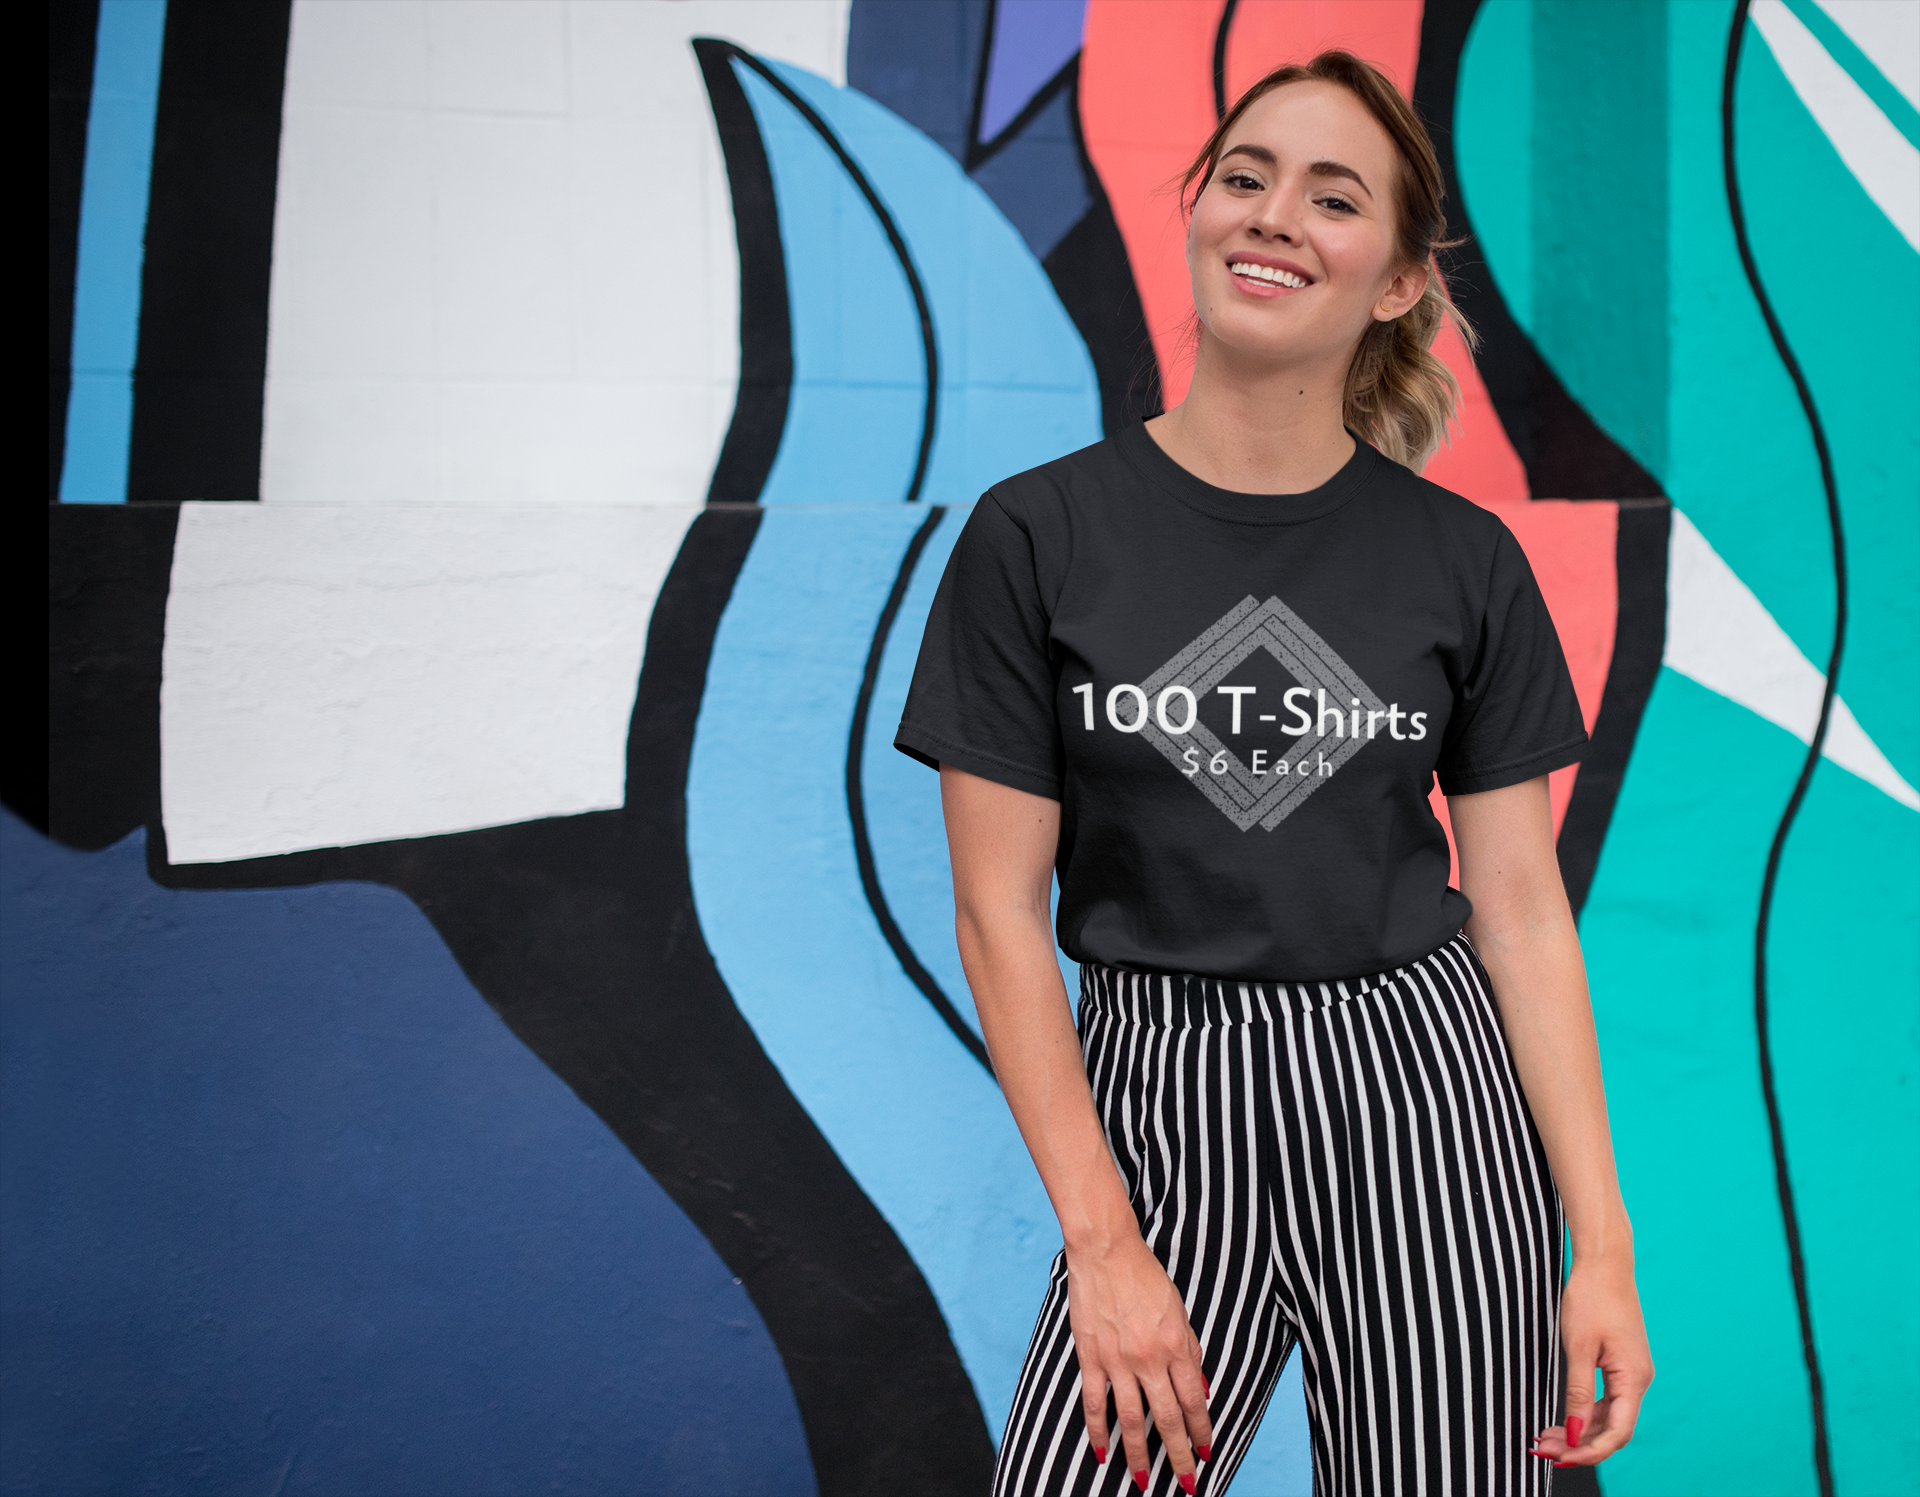 tee-mockup-of-a-smiling-girl-in-front-of-a-wall-with-colorful-illustrations-26646